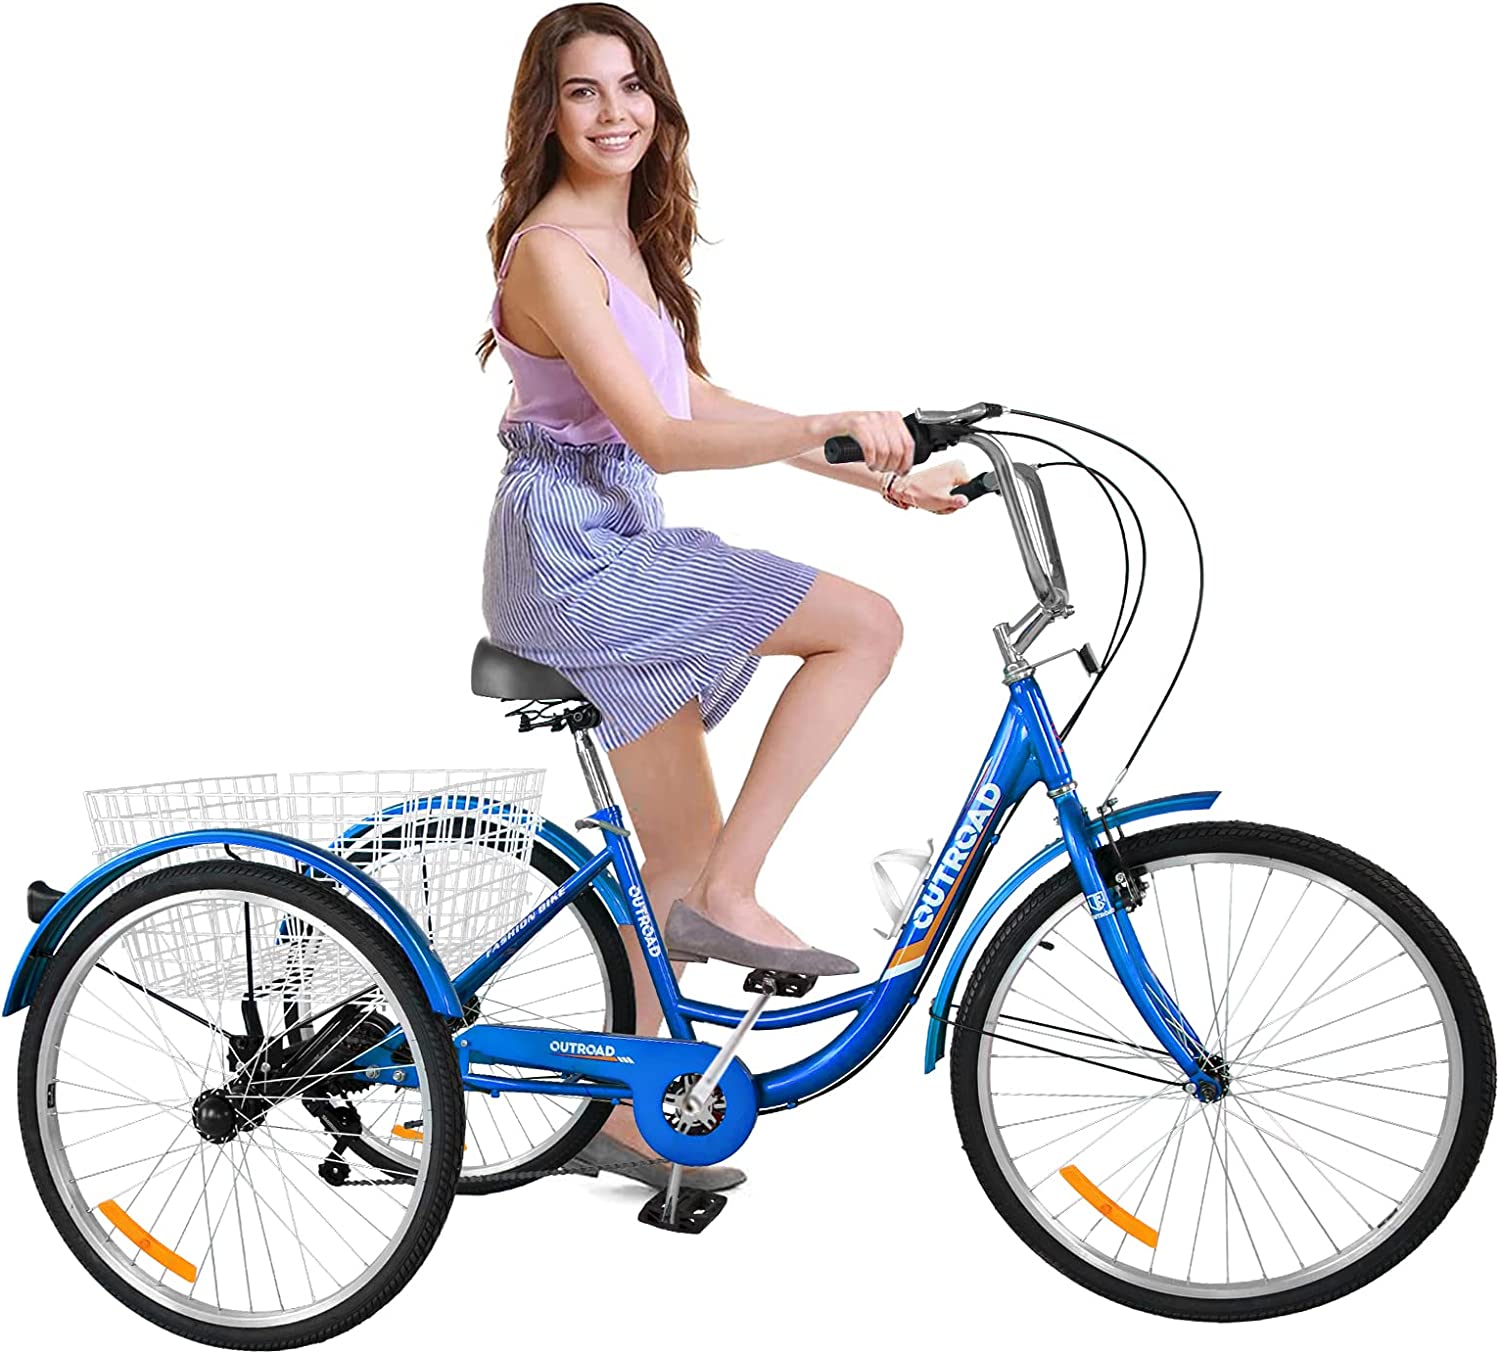 MarKnig 7 Speeds Adult Tricycles with Large Basket